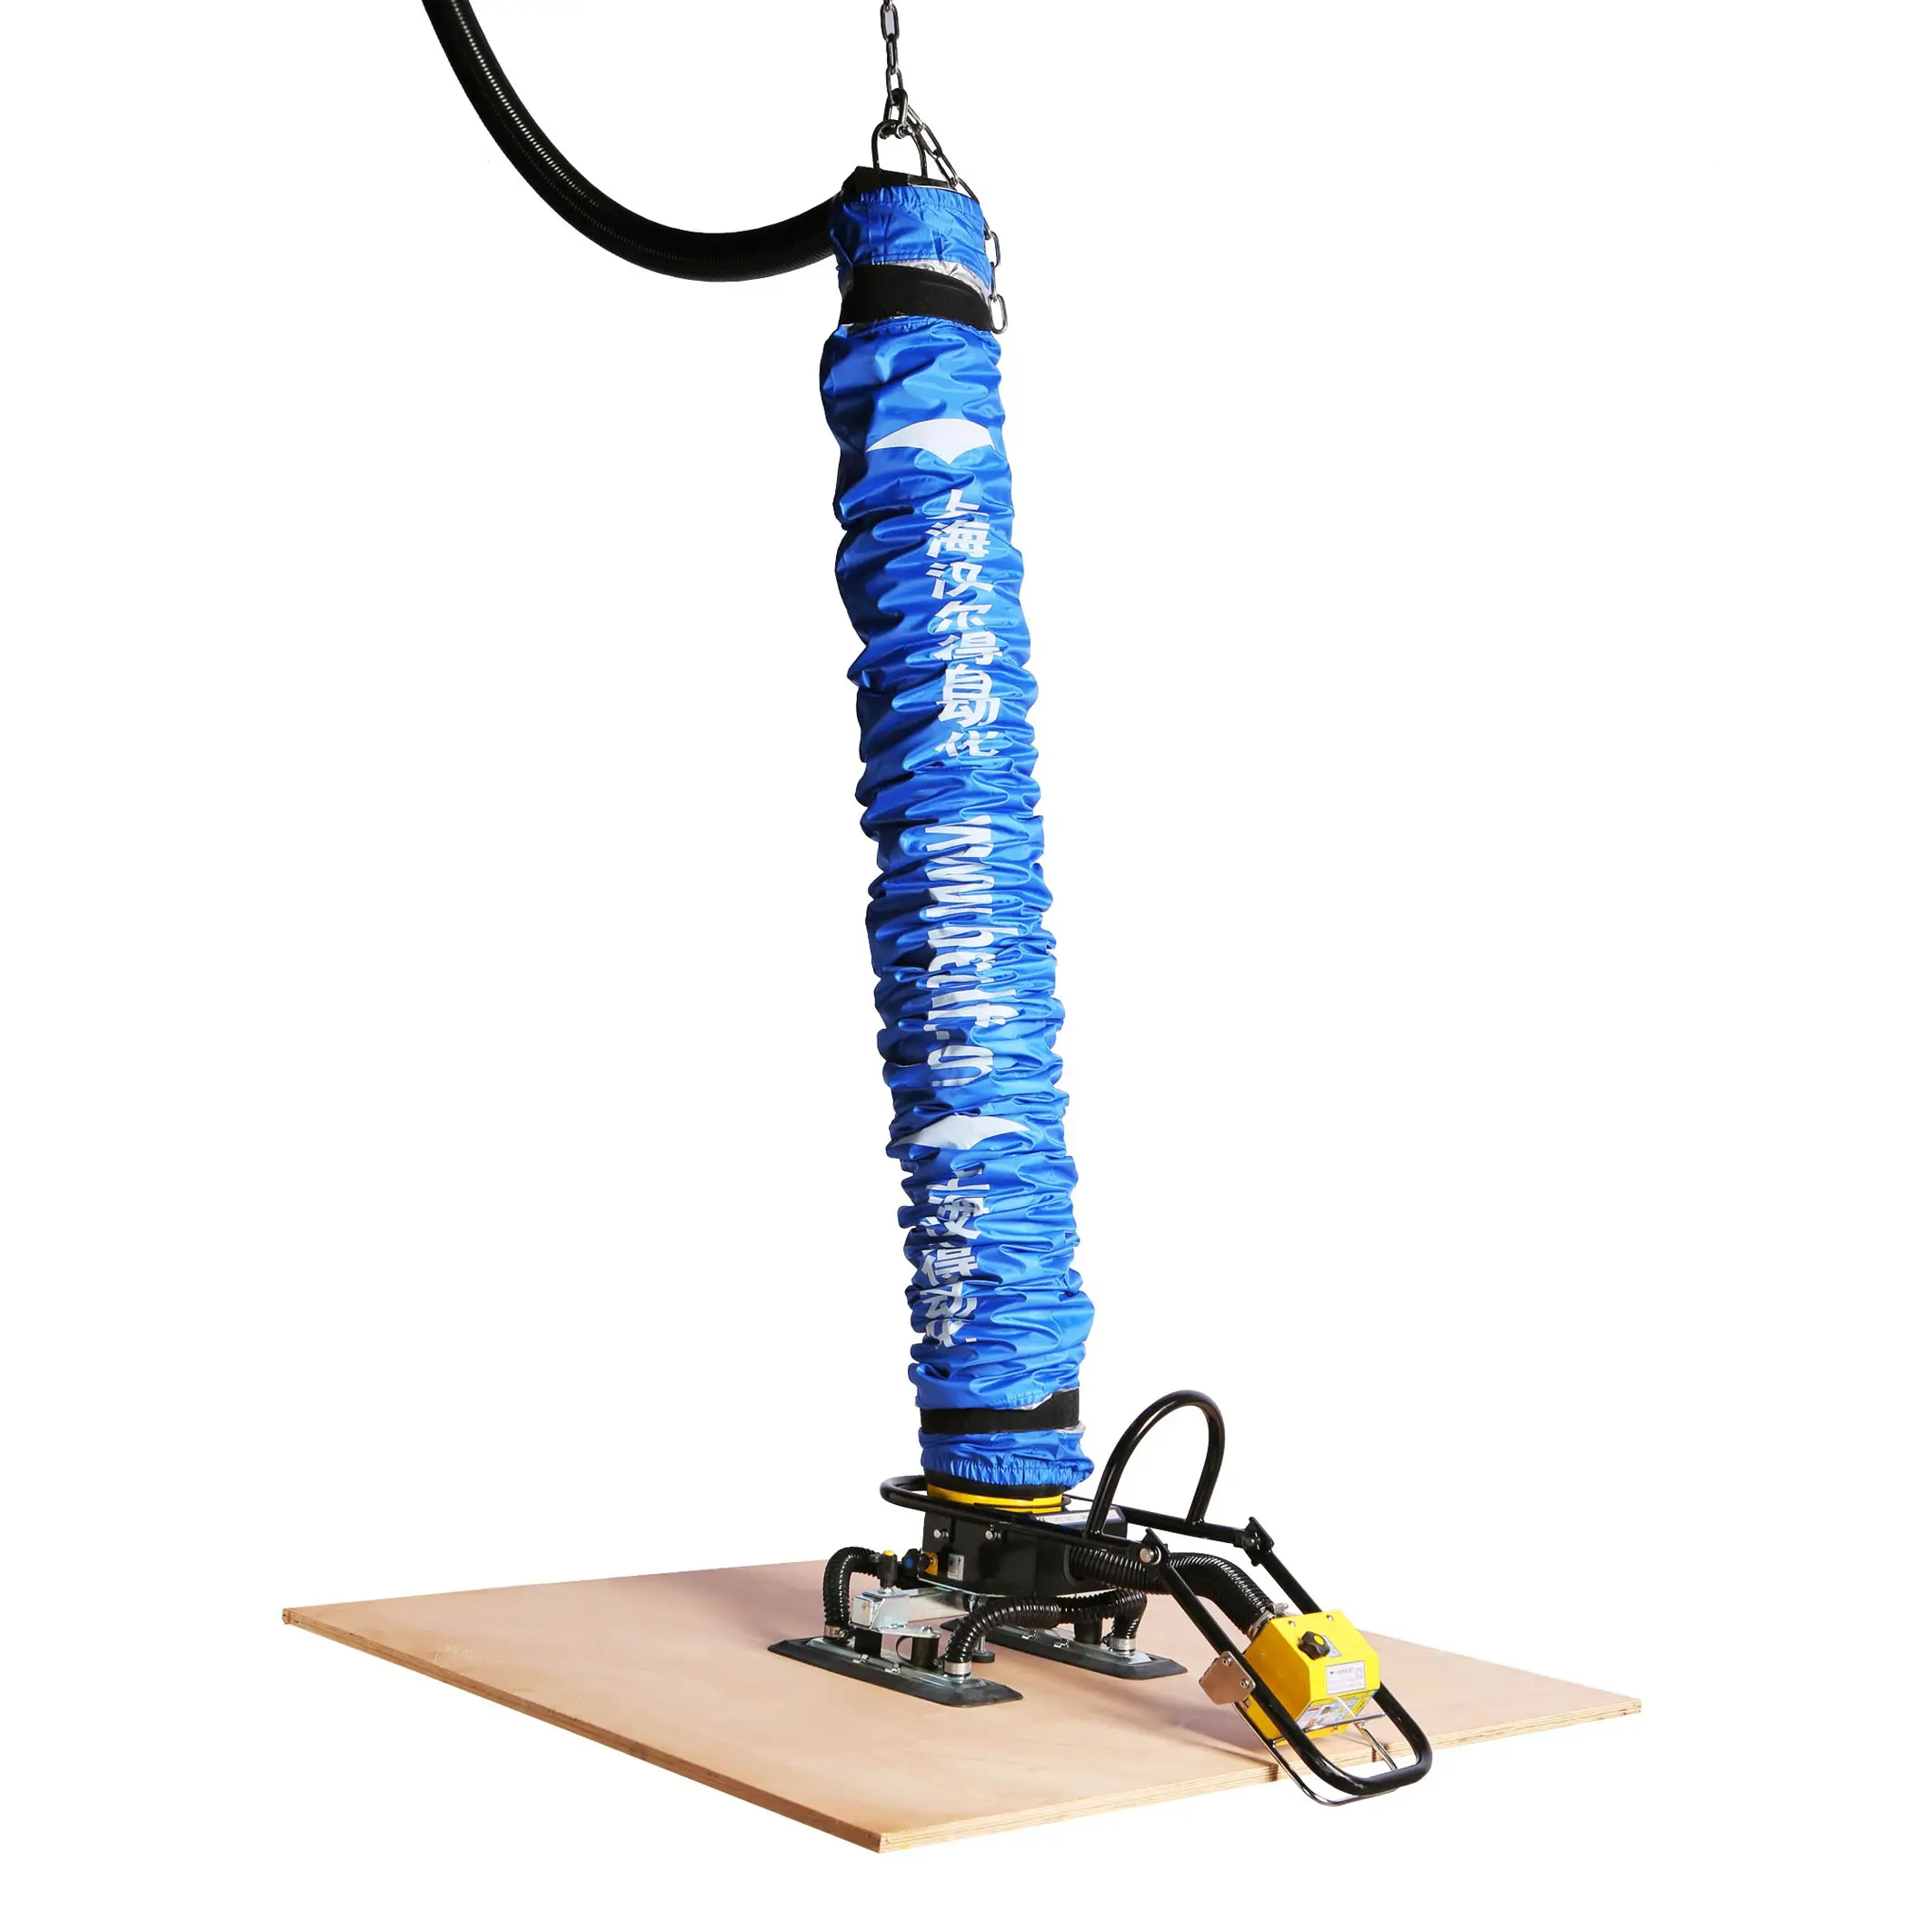 Herolift Handling Equipment Vacuum Suction Cup for Rough Porous and Even Wet Surfaces Tile Slab Lifting